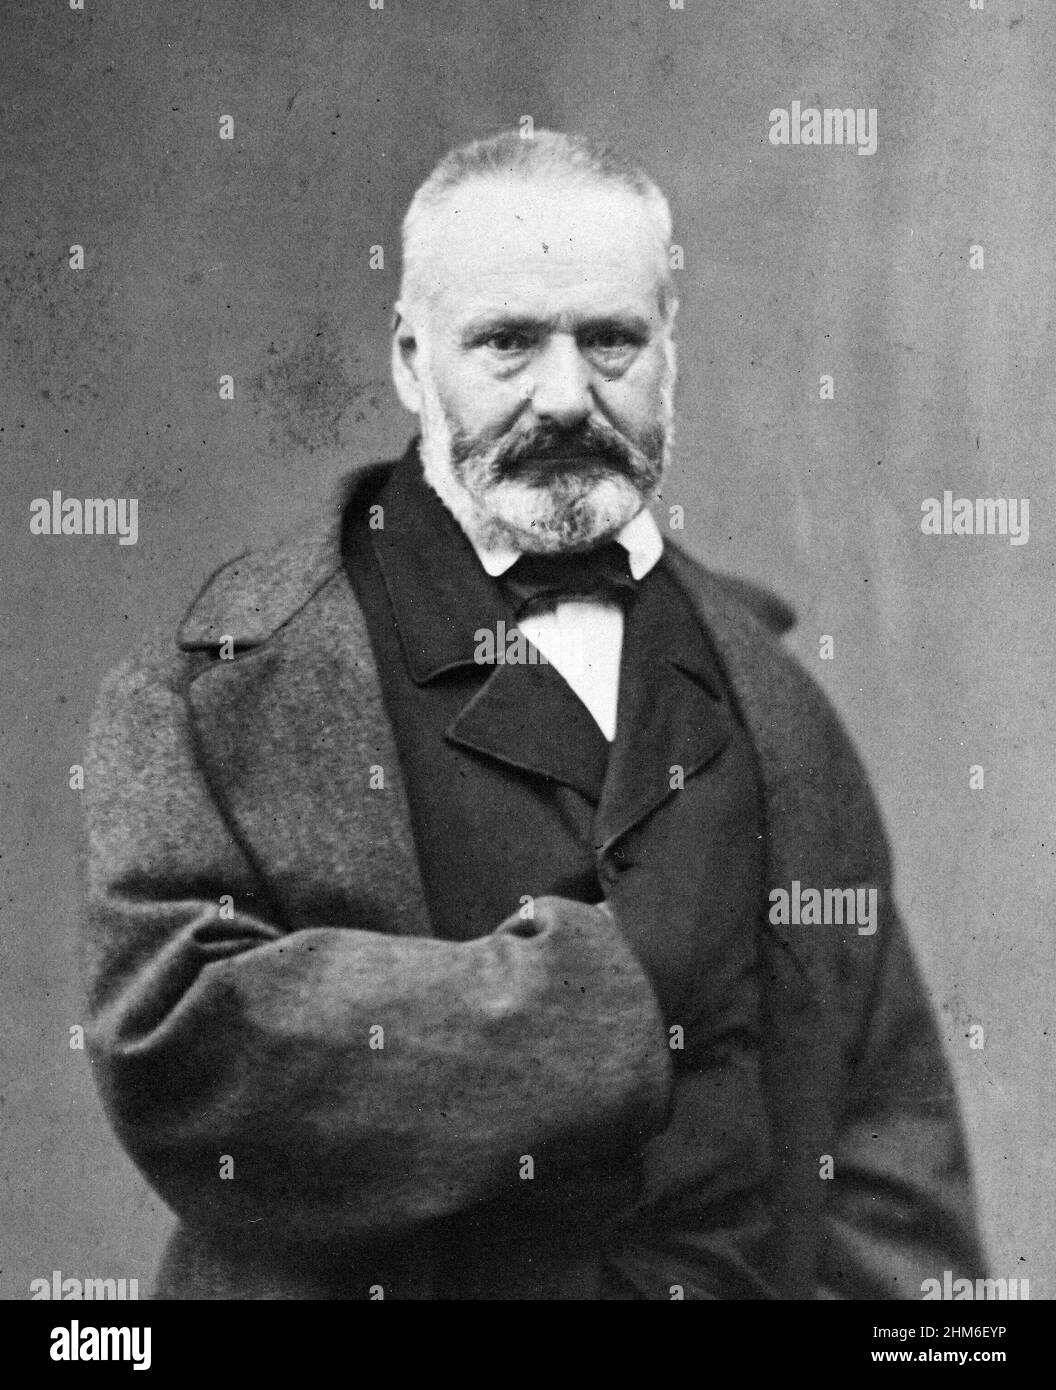 A portrait of the French writer Victor Hugo, author of Les Misèrables, from 1861 when he was 59 yrs old. Stock Photo